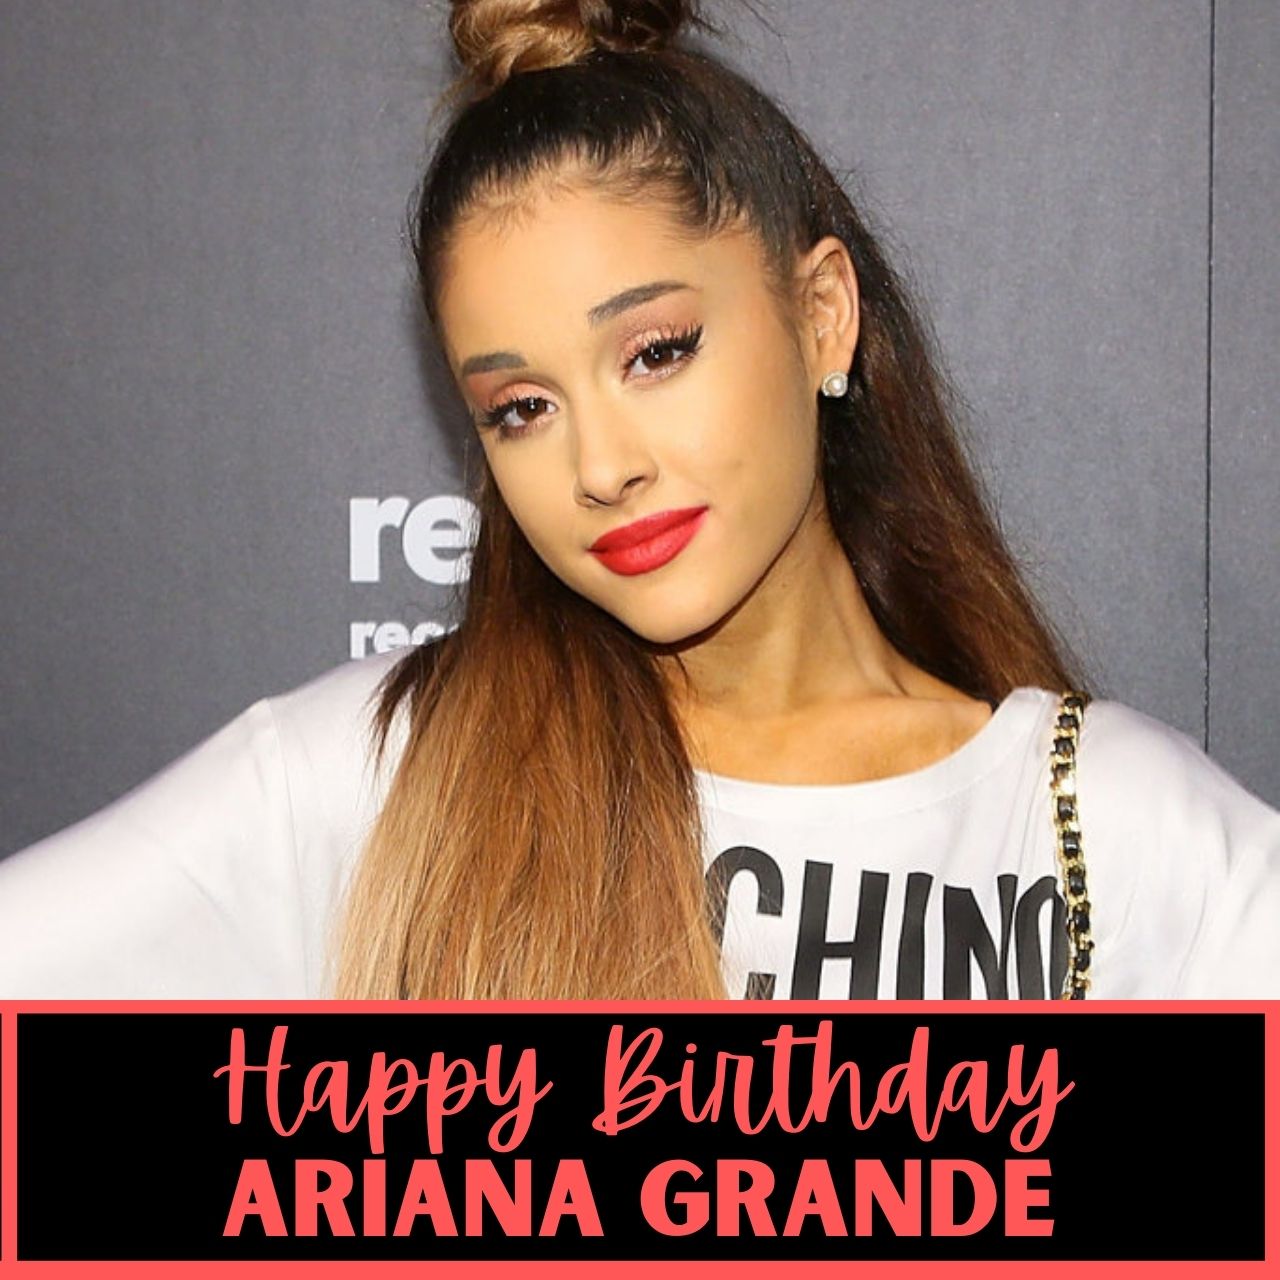 Happy Birthday Ariana Grande Wishes, Images, Messages, And Greetings To